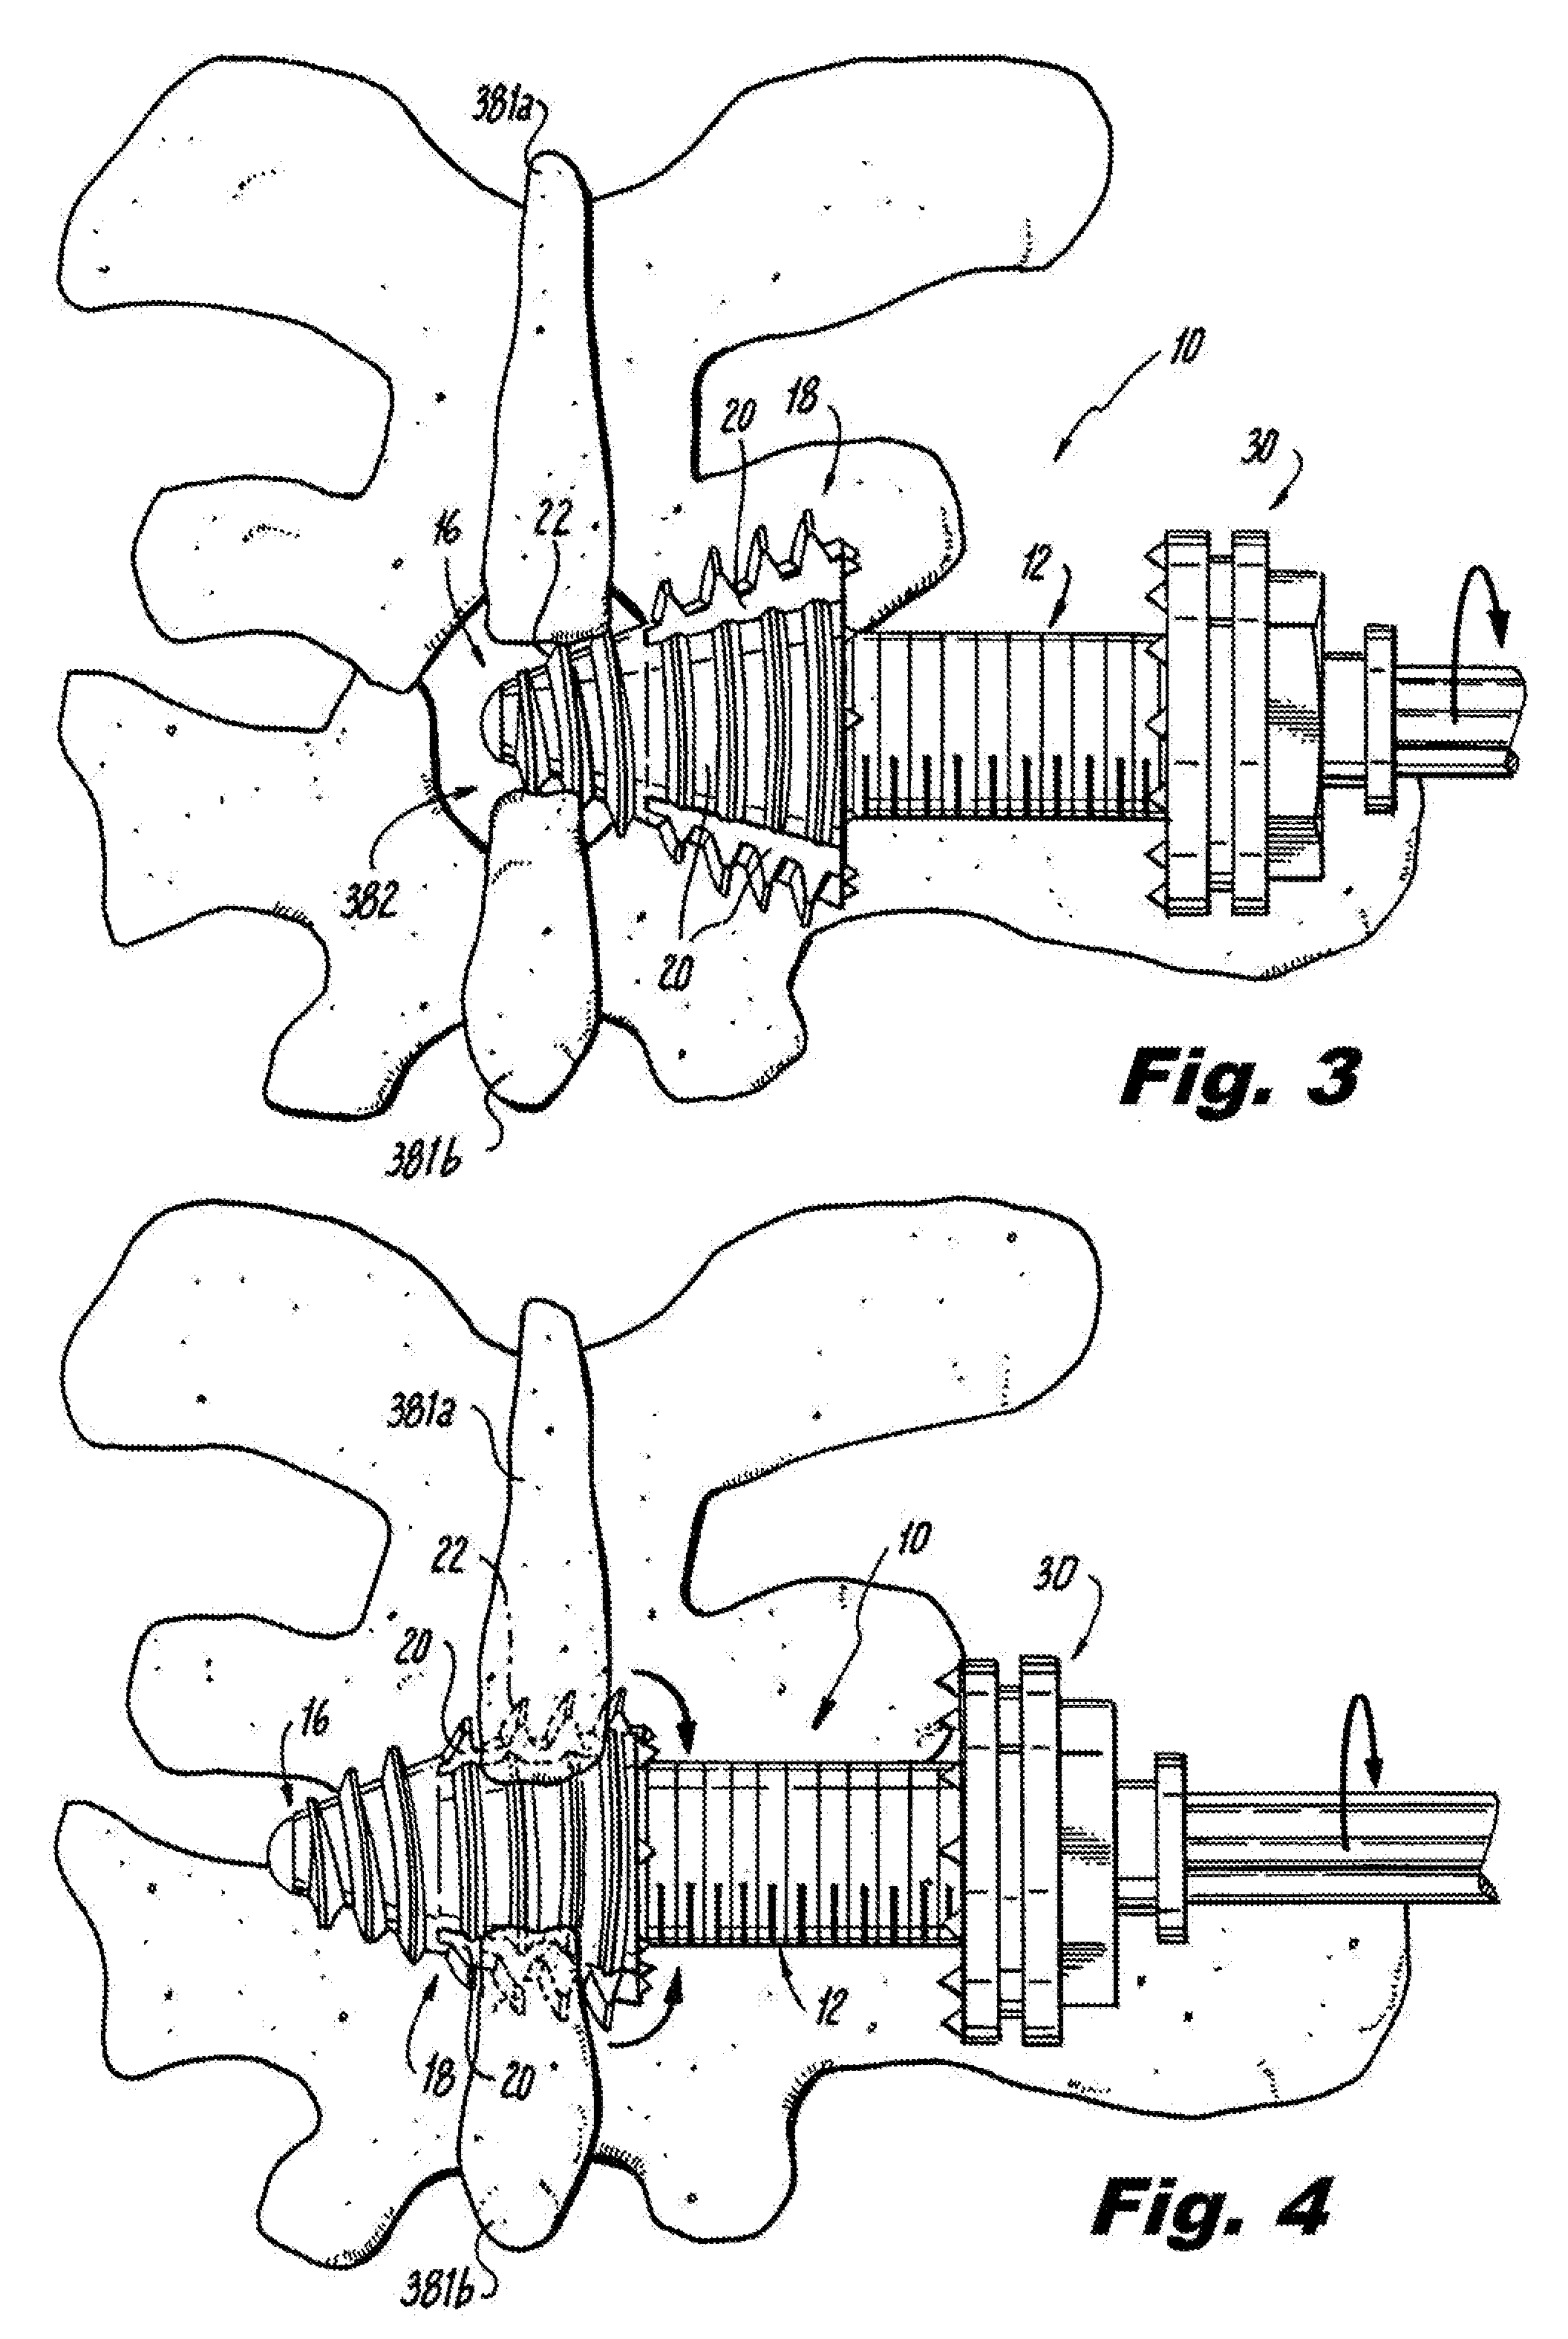 Interspinous Process Implant and Fusion Cage Spacer